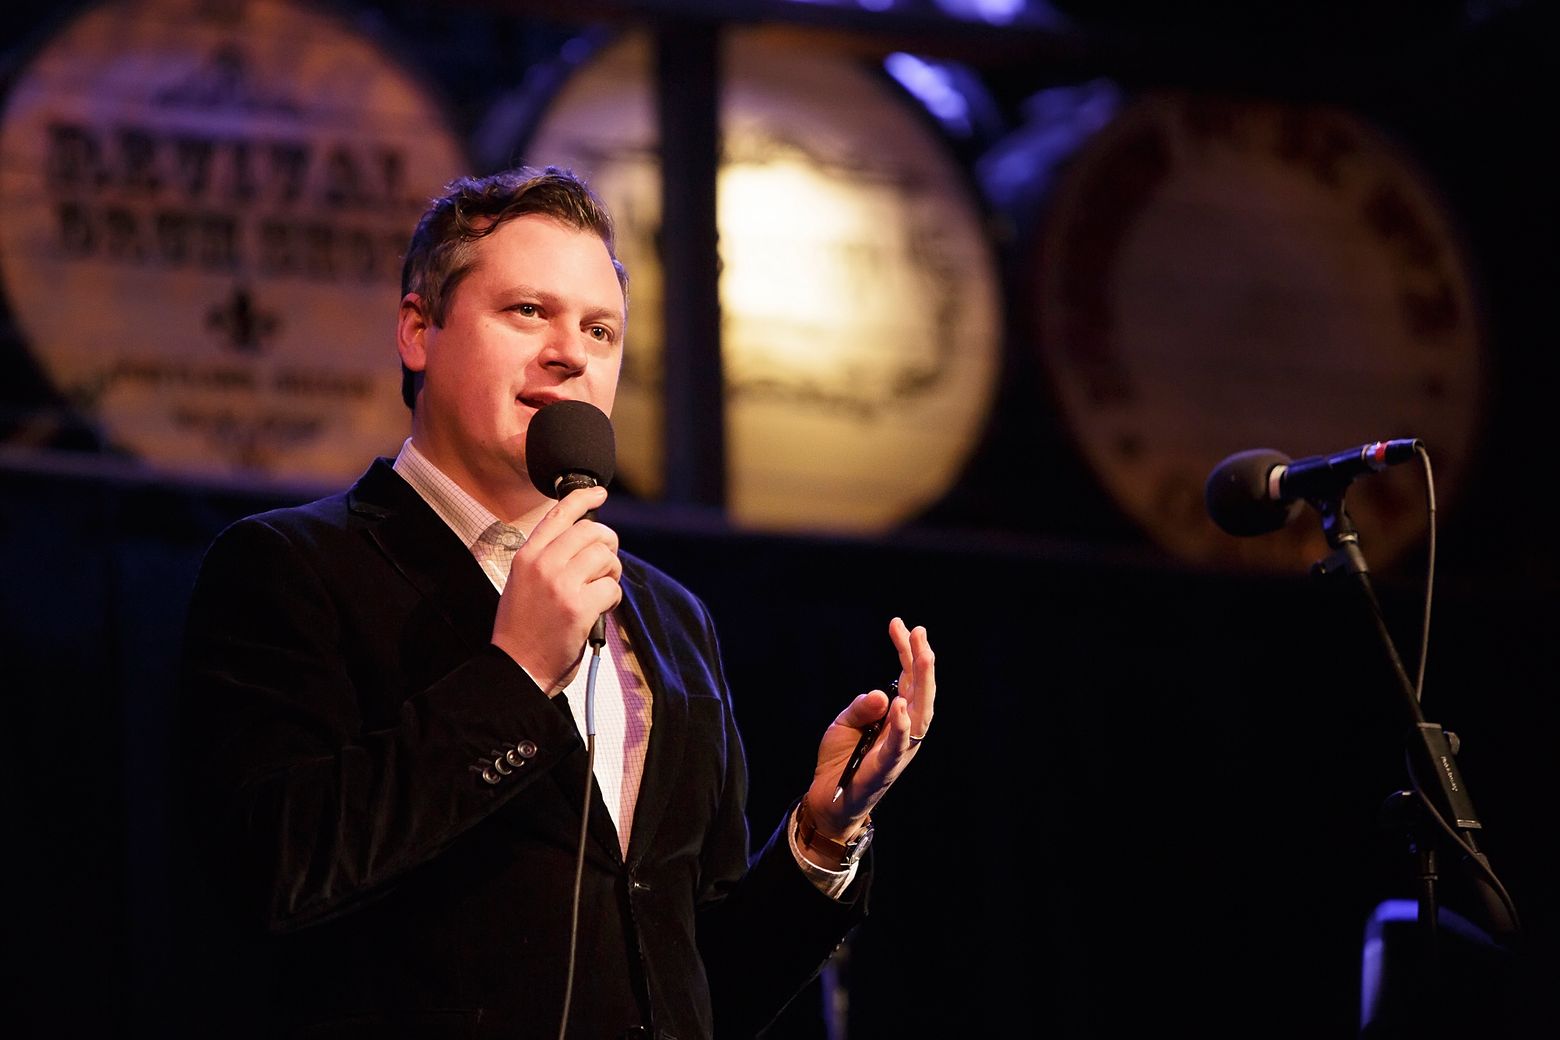 I'm like a cold sore': Luke Burbank brings 'Live Wire!' back to Seattle